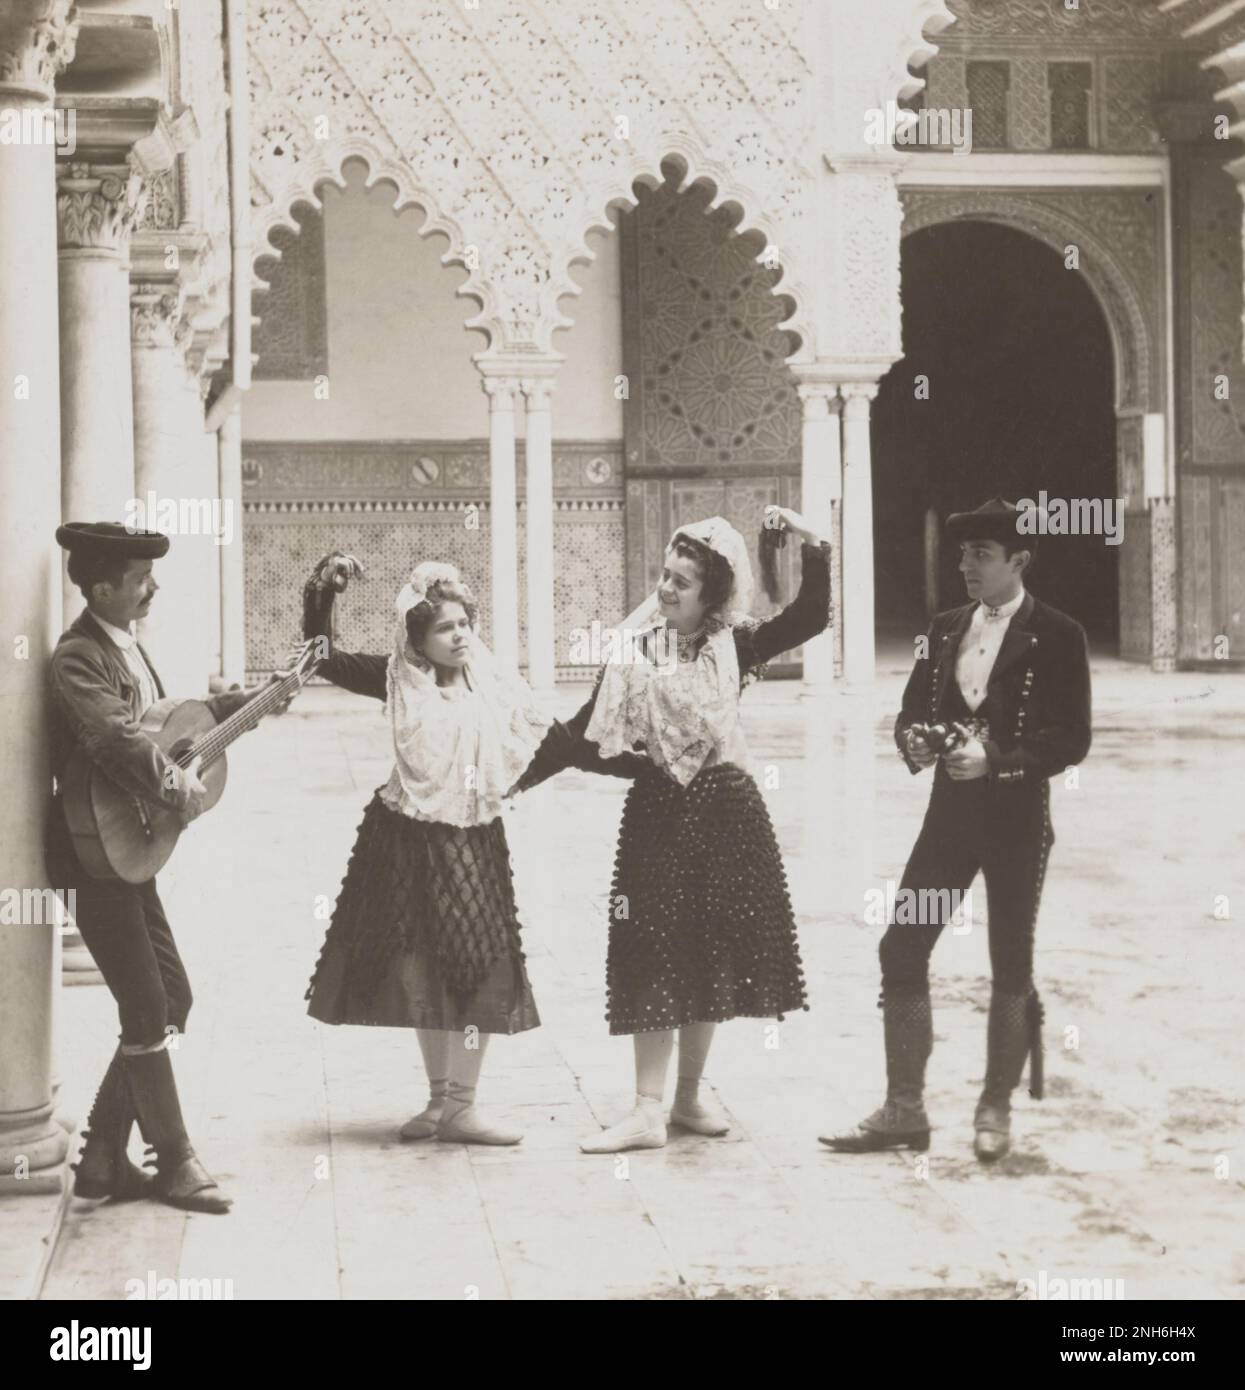 Culture of Old Spain. Spanish dancers in the Alcazar, Seville, Spain. 1908 The Royal Alcázars of Seville (Spanish: Reales Alcázares de Sevilla), historically known as al-Qasr al-Muriq and commonly known as the Alcázar of Seville, is a royal palace in Seville, Spain, built for the Christian king Peter of Castile. It was built by Castilian Christians on the site of an Abbadid Muslim alcazar, or residential fortress. Stock Photo